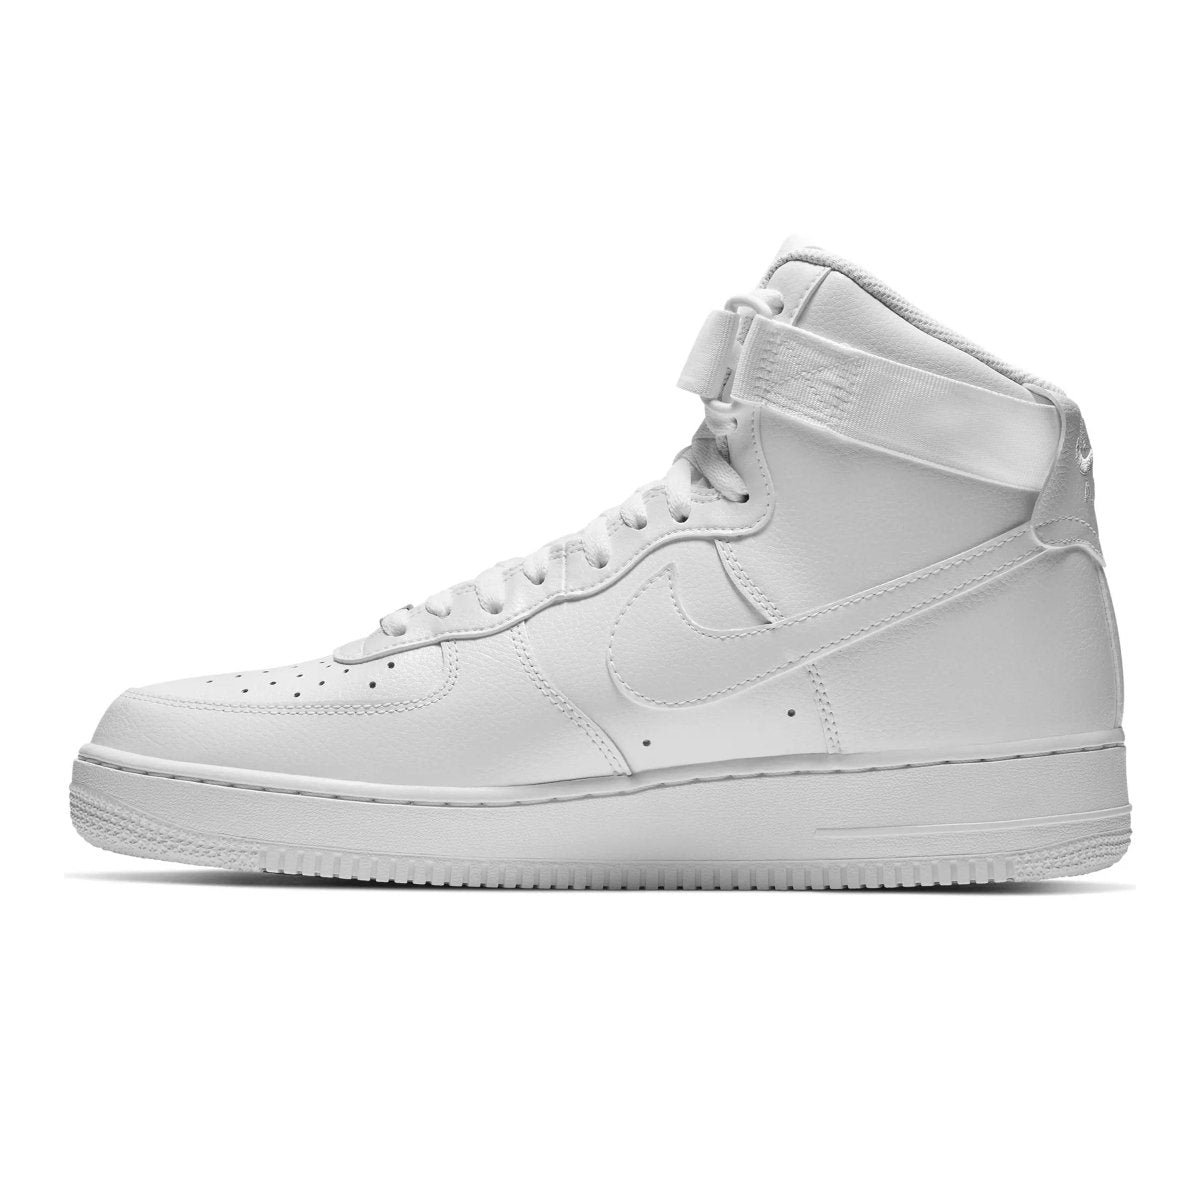 Nike Air Force 2 High NYC Men's - 624006-081 - US